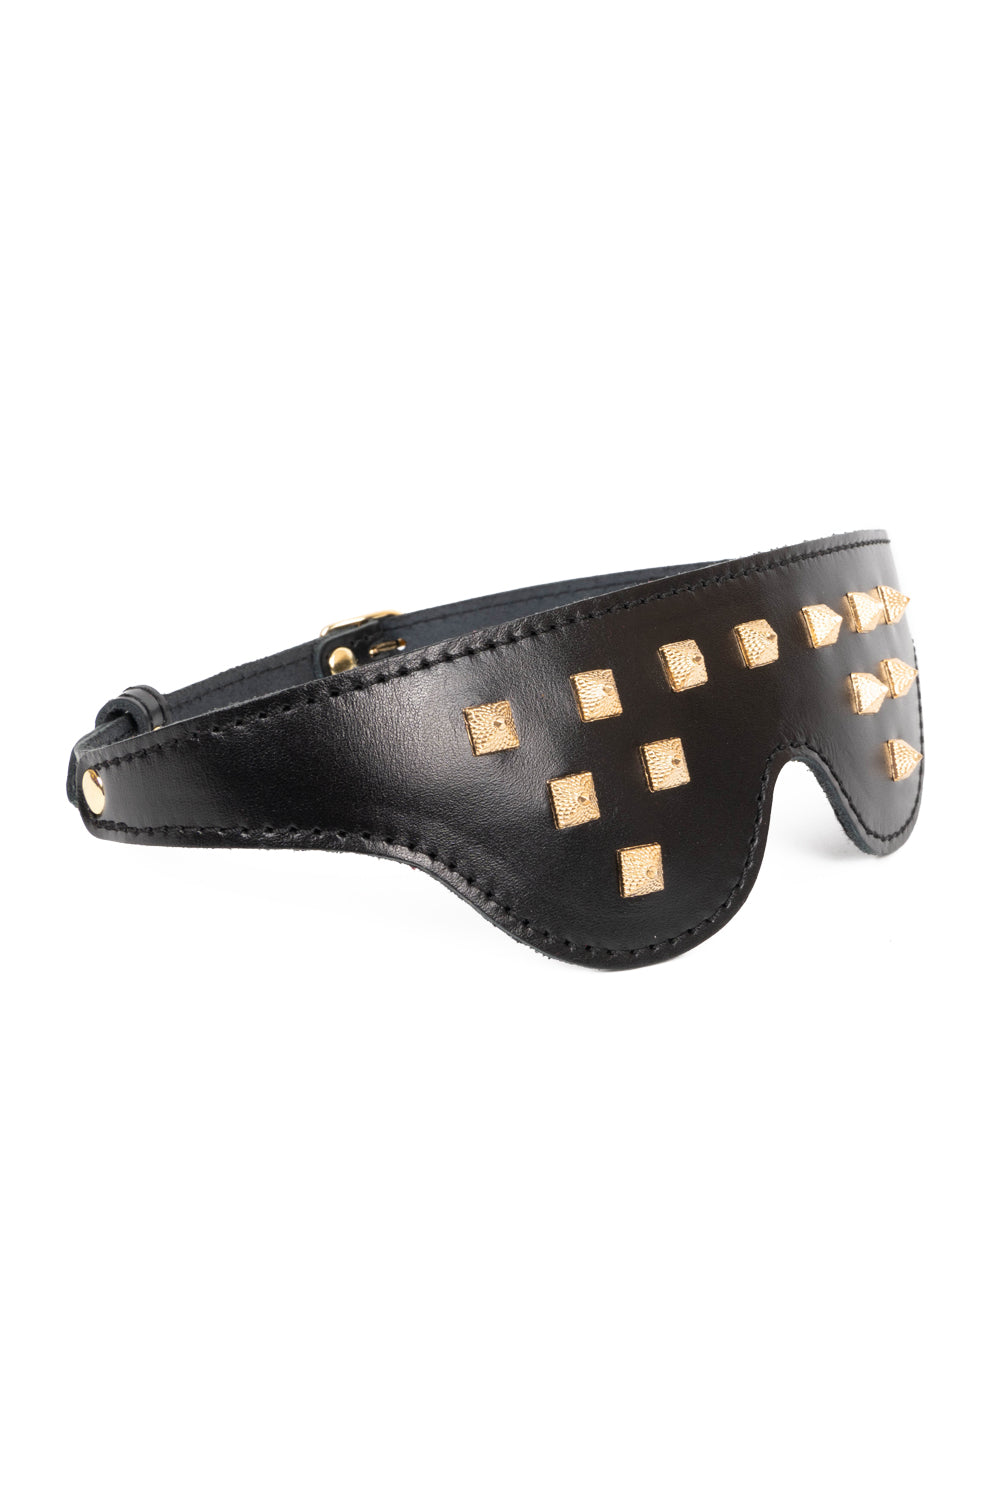 Leather Blindfold Mask with spikers. Black